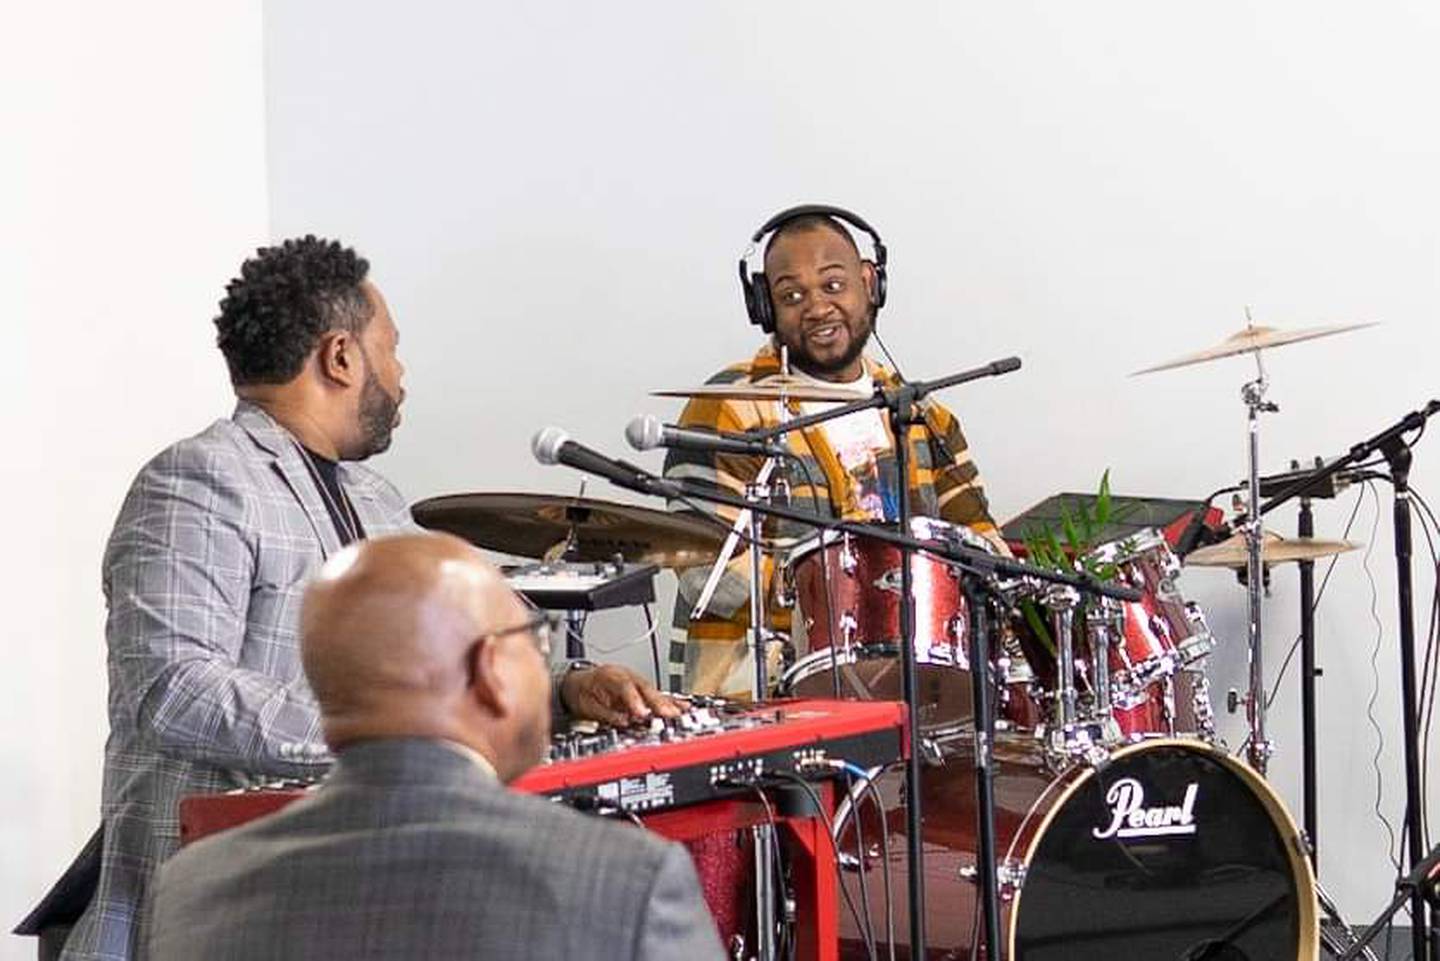 Members of The Way Church of Joliet celebrate its eighth anniversary in April 2022 at its new space on Theodore Street in Joliet.  Pictured are worship team leader Andre Thompson on keyboards and Kyler Winfrey on drums.